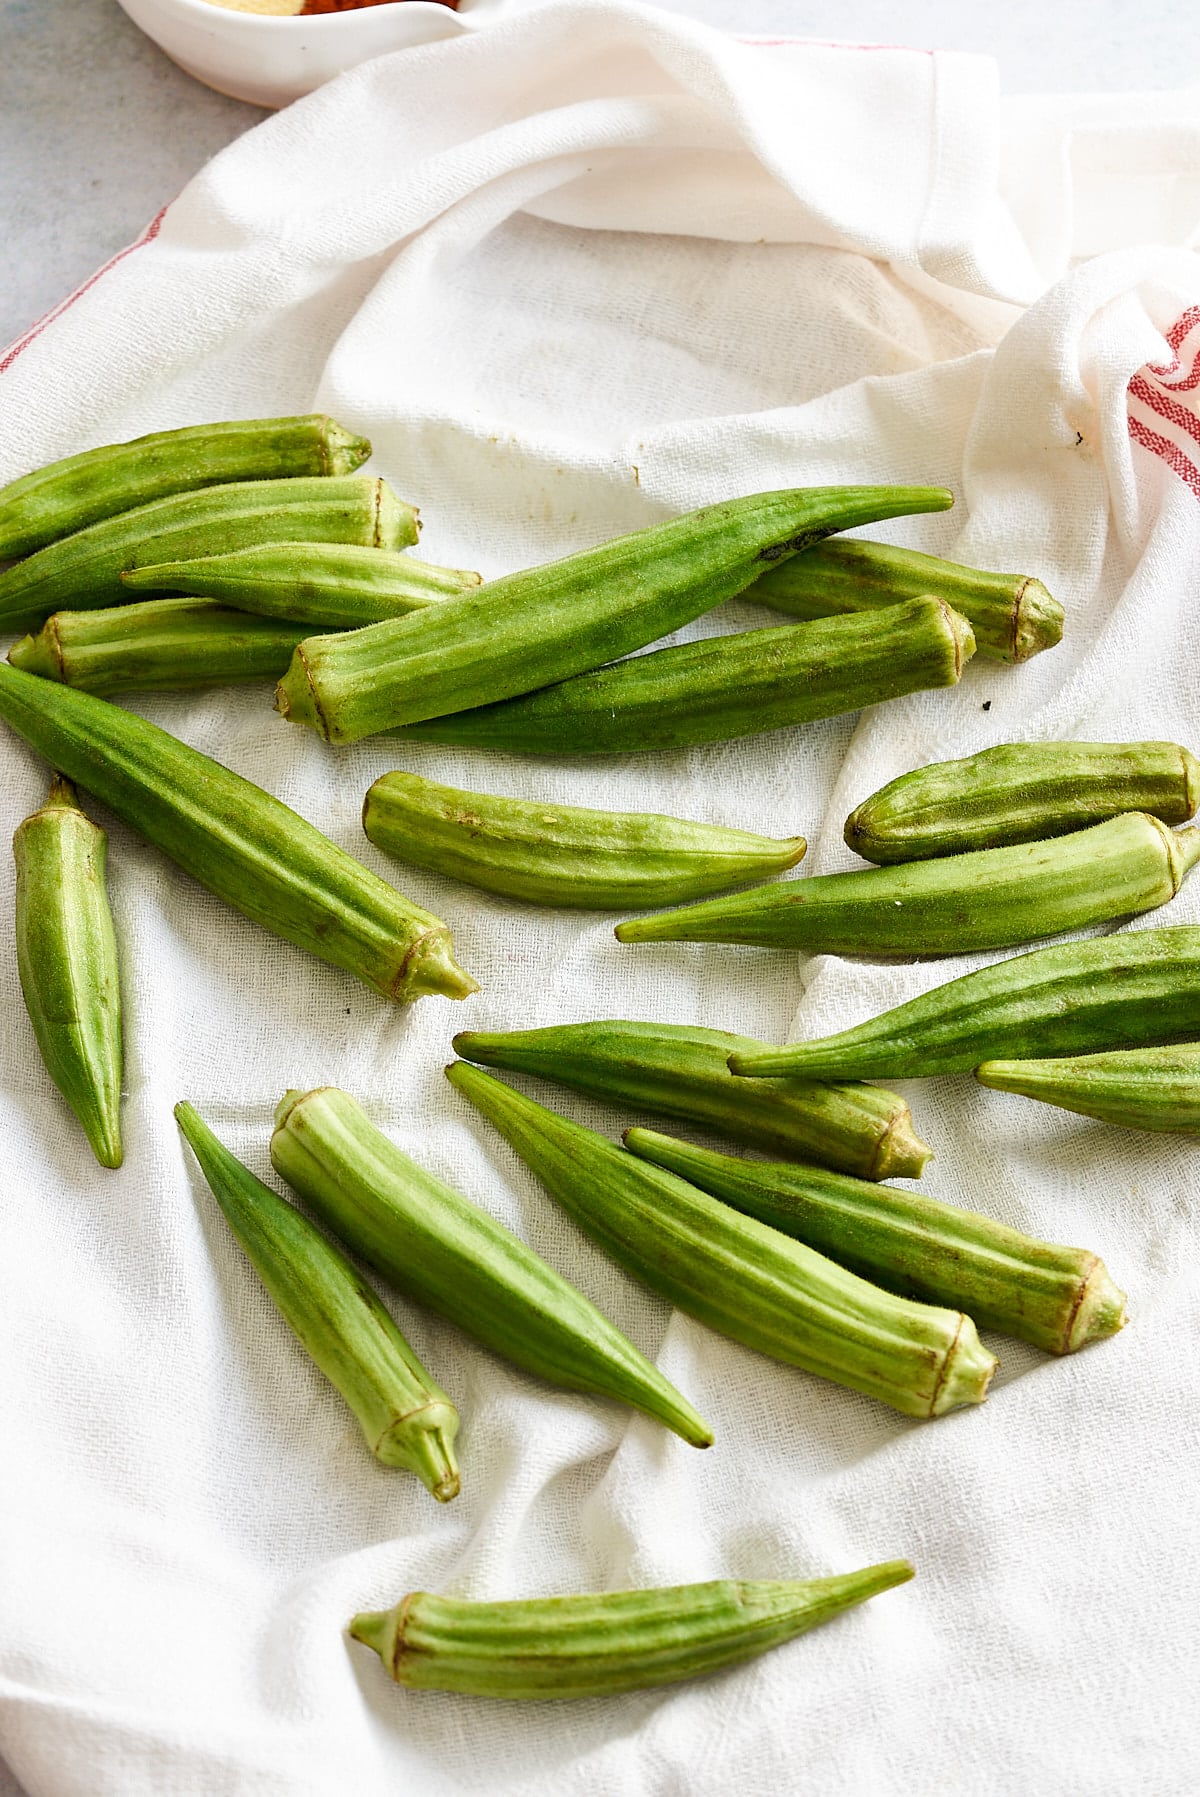 Whole okra being dried on a kitchen towel.